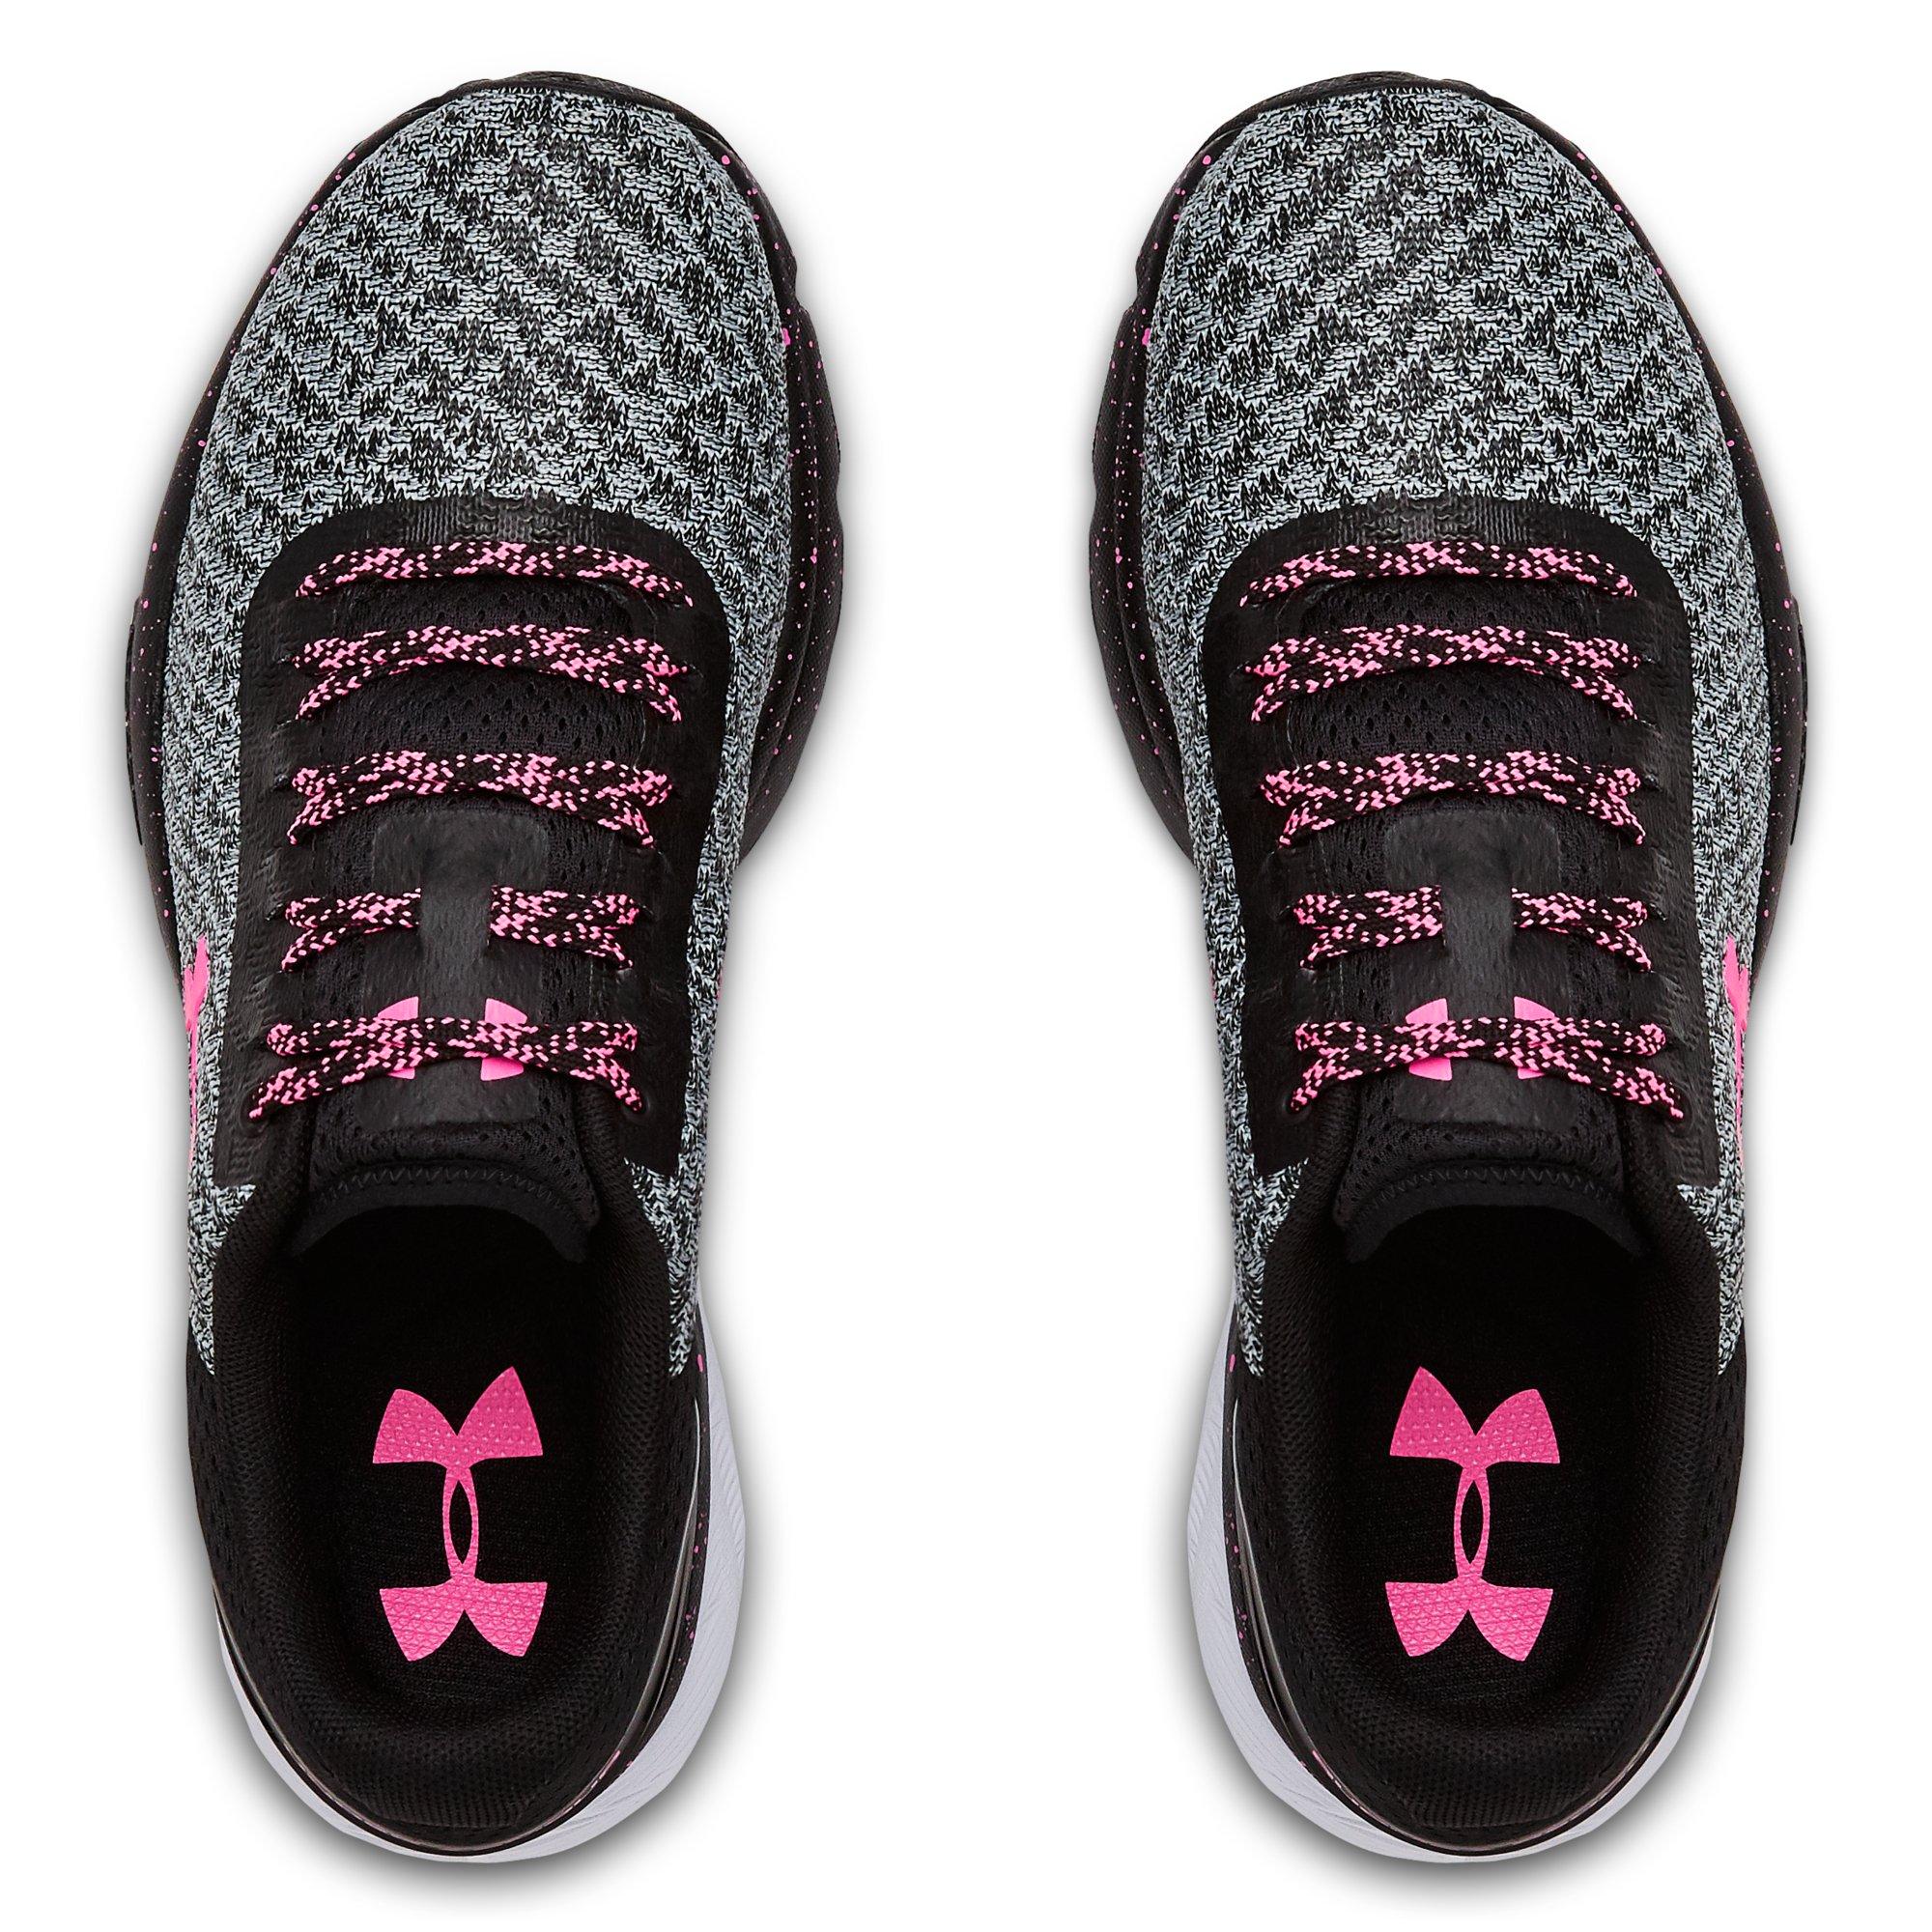 under armour charged escape 2 women's